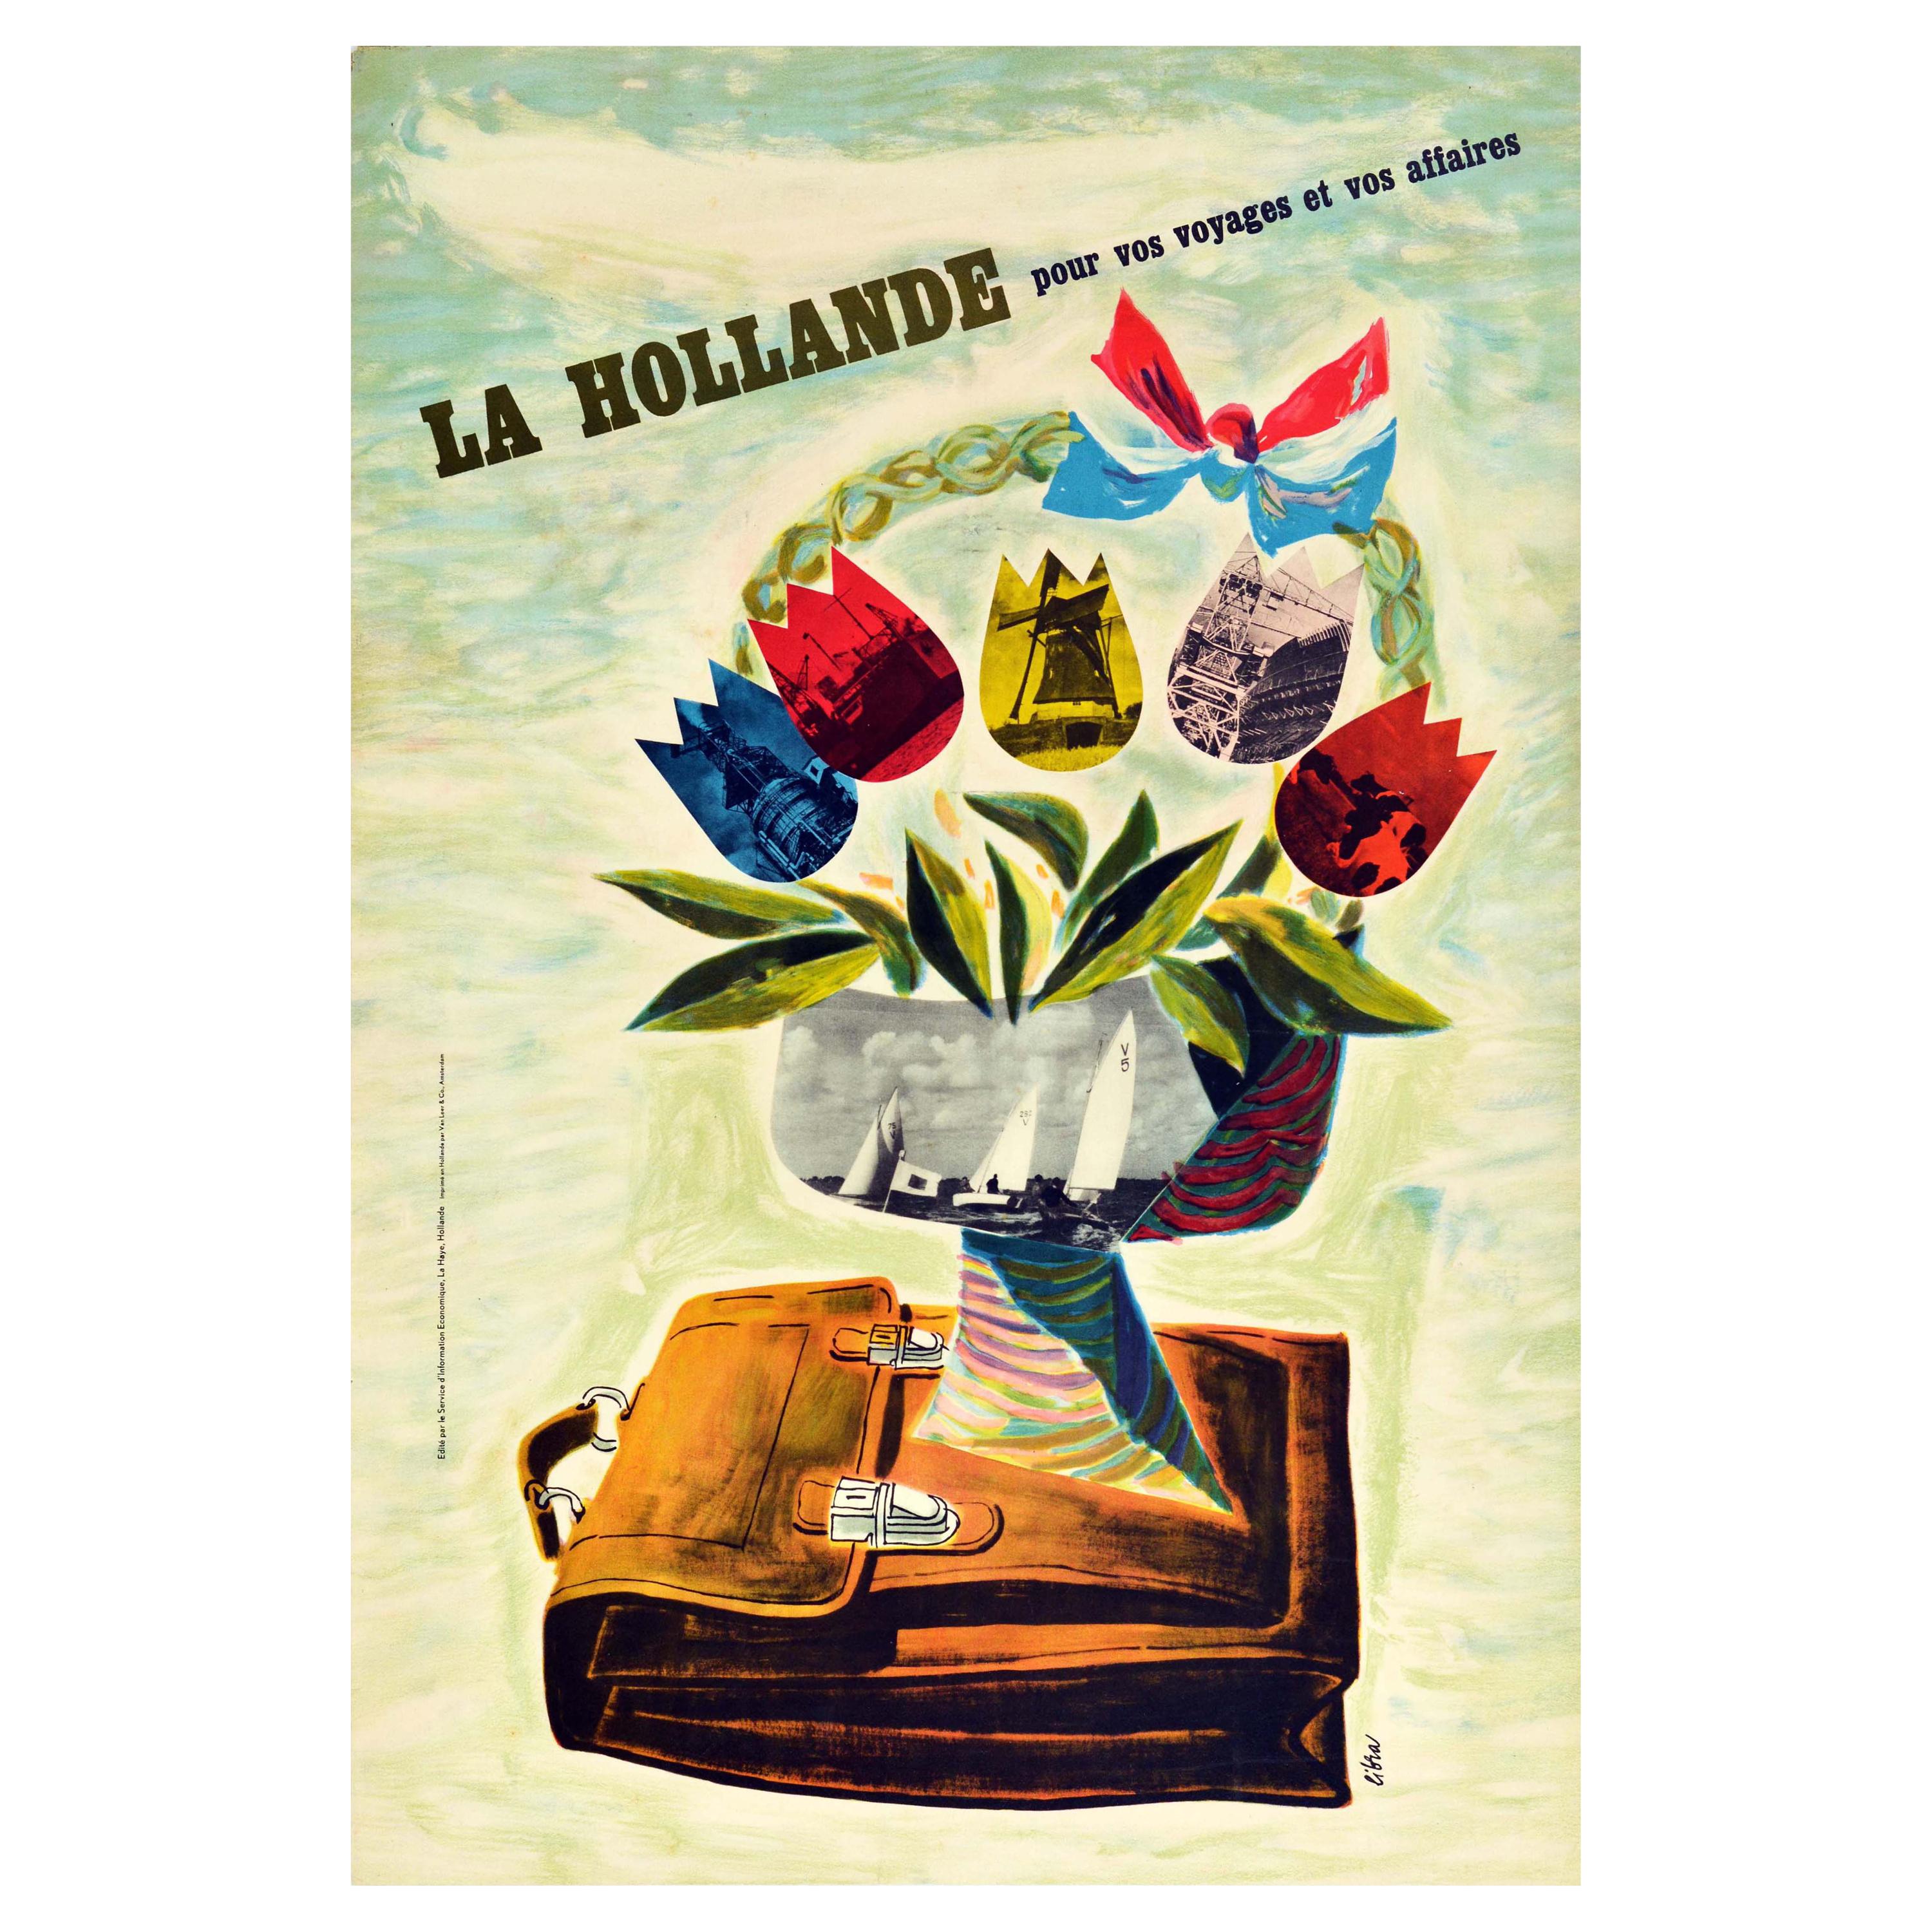 Original Vintage Poster Holland Travel Business Industry Sailing Windmill Tulips